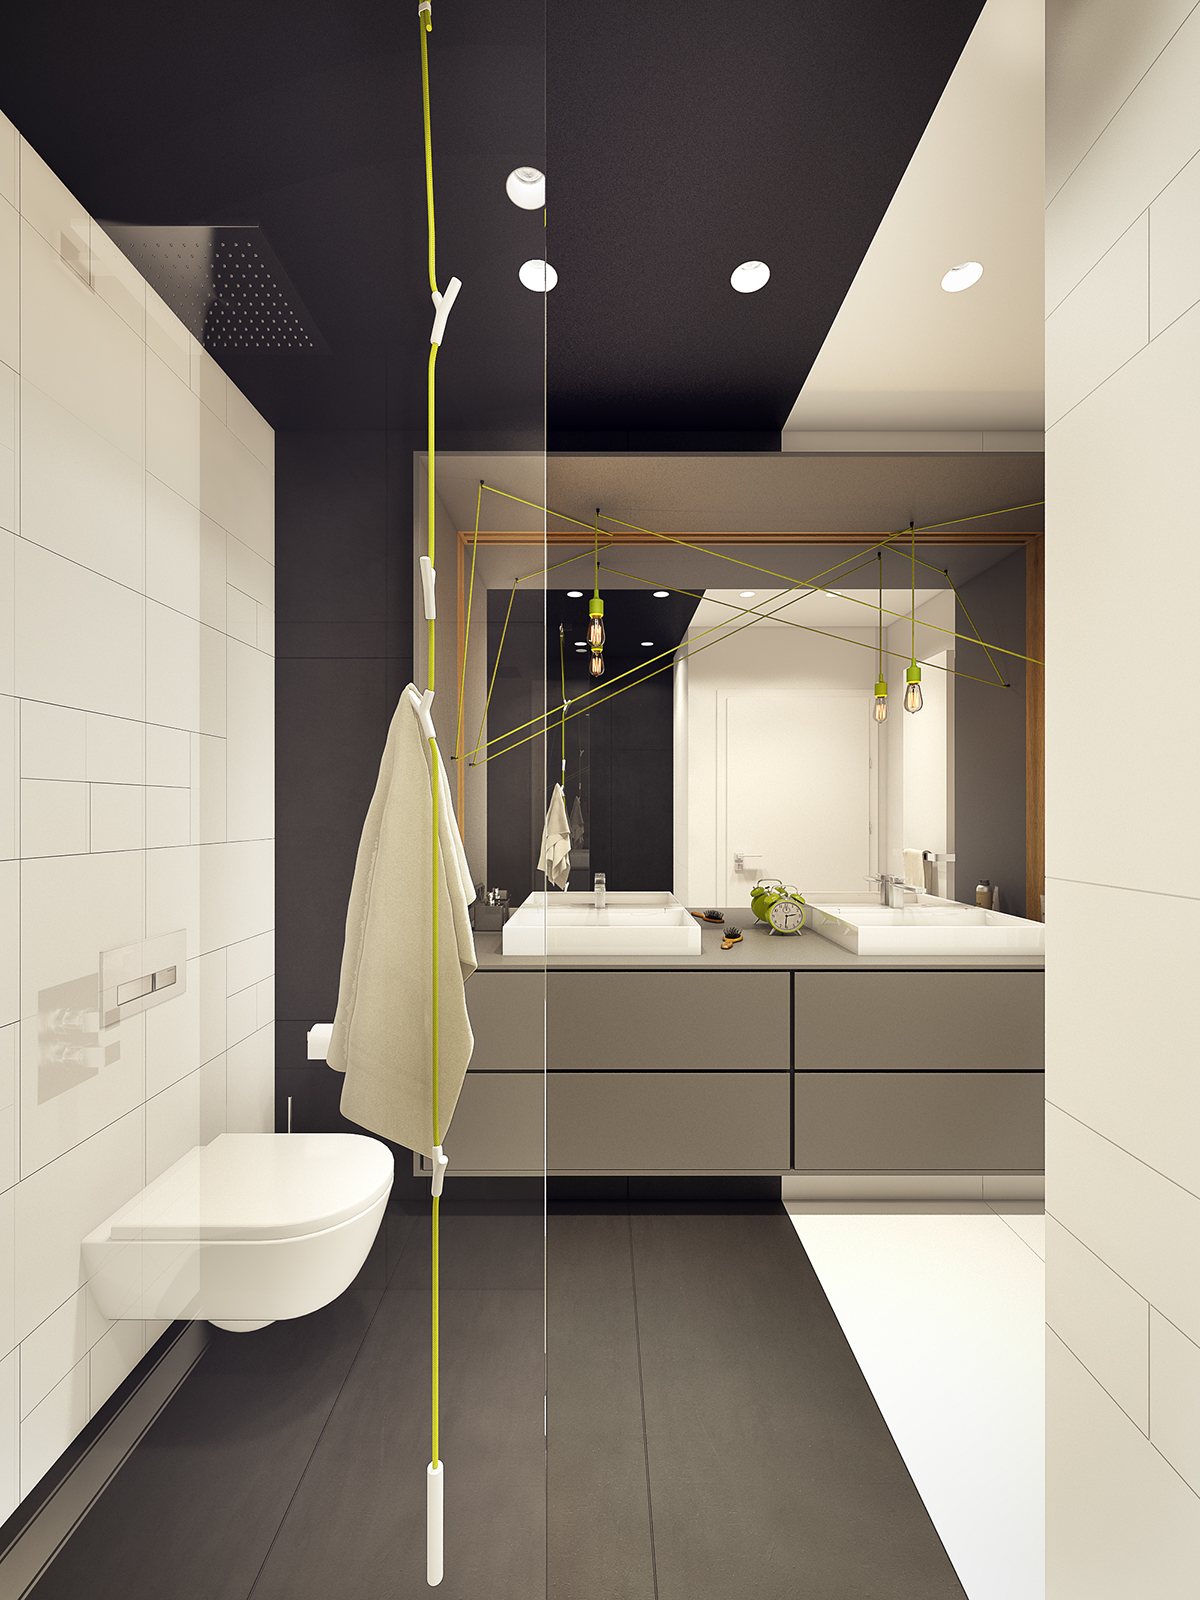 Gray bathroom design "width =" 1200 "height =" 1600 "srcset =" https://mileray.com/wp-content/uploads/2020/05/1588511605_331_Minimalist-And-Simple-Bedroom-Design-With-Gray-Shades.jpg 1200w, https: / /mileray.com/wp-content/uploads/2016/03/lime-green-and-gray-bathroom-225x300.jpg 225w, https://mileray.com/wp-content/uploads/2016/03/lime - green-gray-bathroom-768x1024.jpg 768w, https://mileray.com/wp-content/uploads/2016/03/lime-green-and-gray-bathroom-696x928.jpg 696w, https: // myfashionos. com / wp-content / uploads / 2016/03 / lime-green-and-gray-bathroom-1068x1424.jpg 1068w, https://mileray.com/wp-content/uploads/2016/03/lime- green-gray Bathroom-315x420.jpg 315w "sizes =" (maximum width: 1200px) 100vw, 1200px